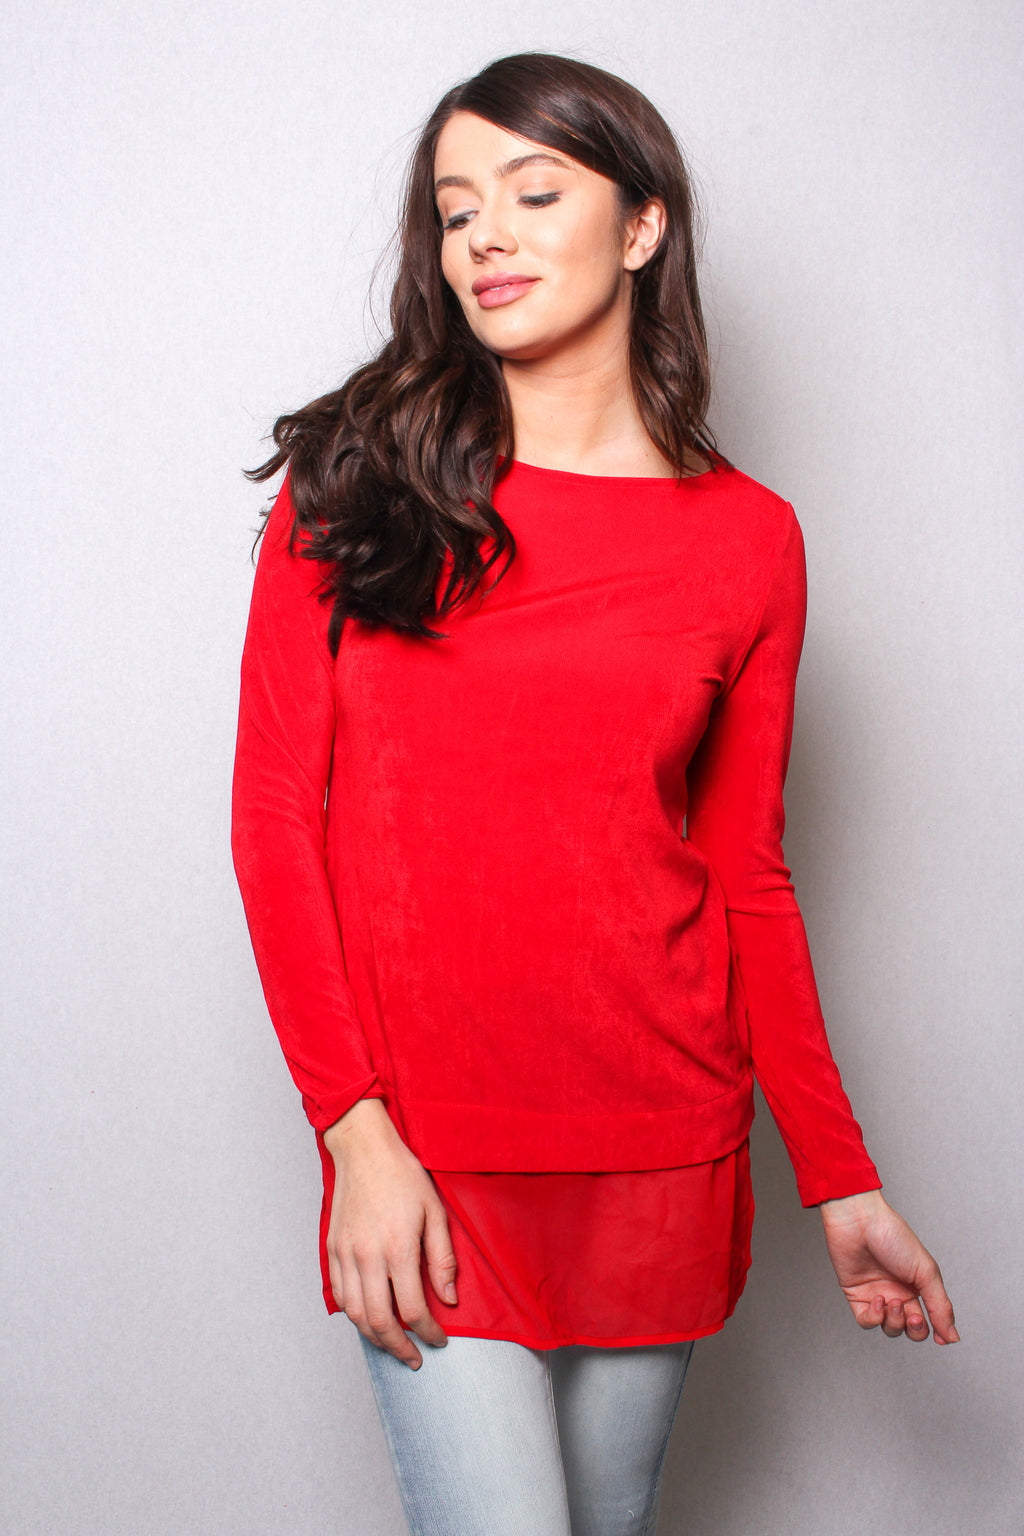 Women's Round Neck Long Sleeves With Chiffon Layer Blouse